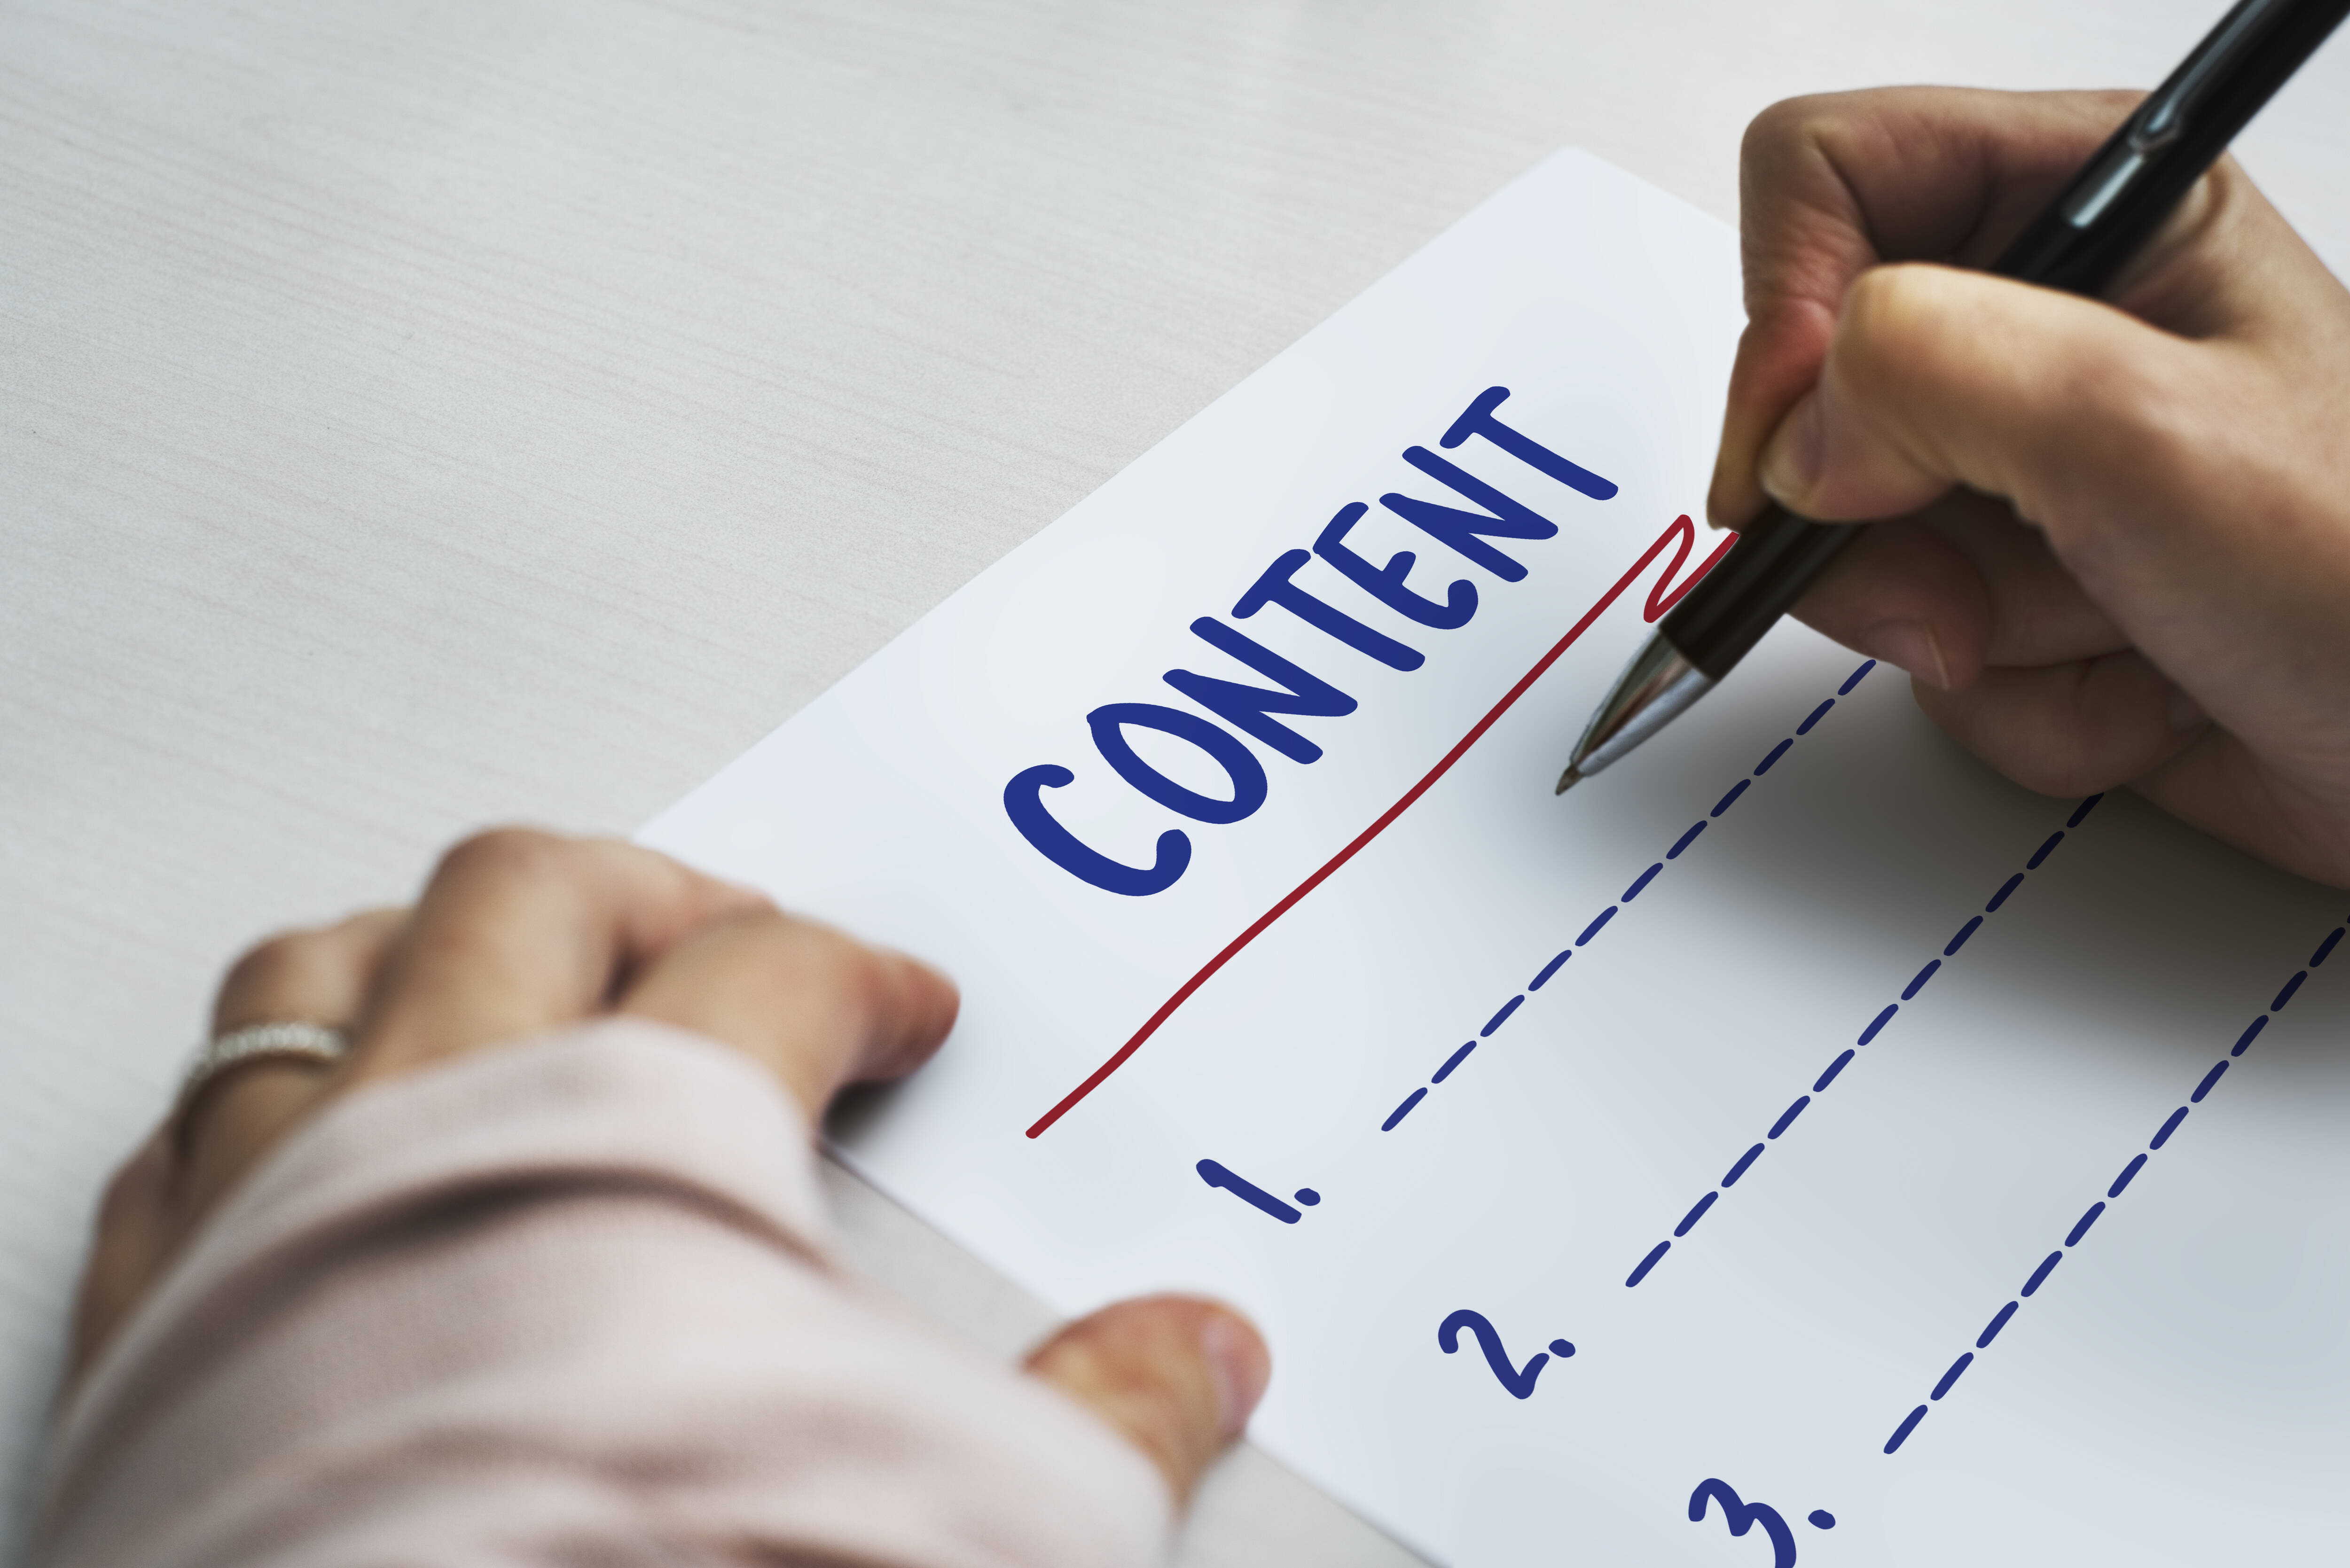 10 Easy Ways to create high-quality content